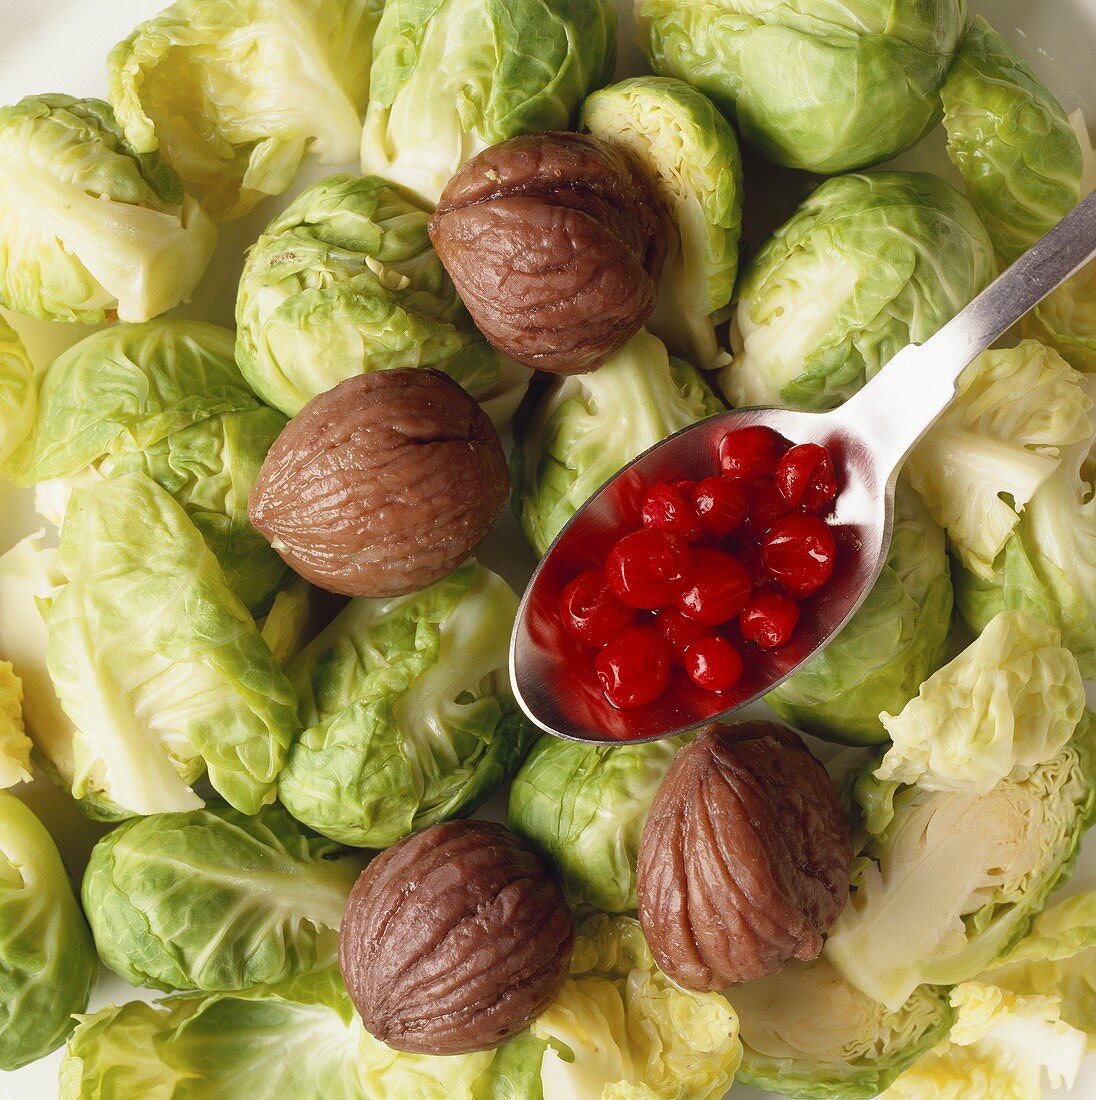 Wildfowl garnish: Brussels sprouts, chestnuts & cranberries